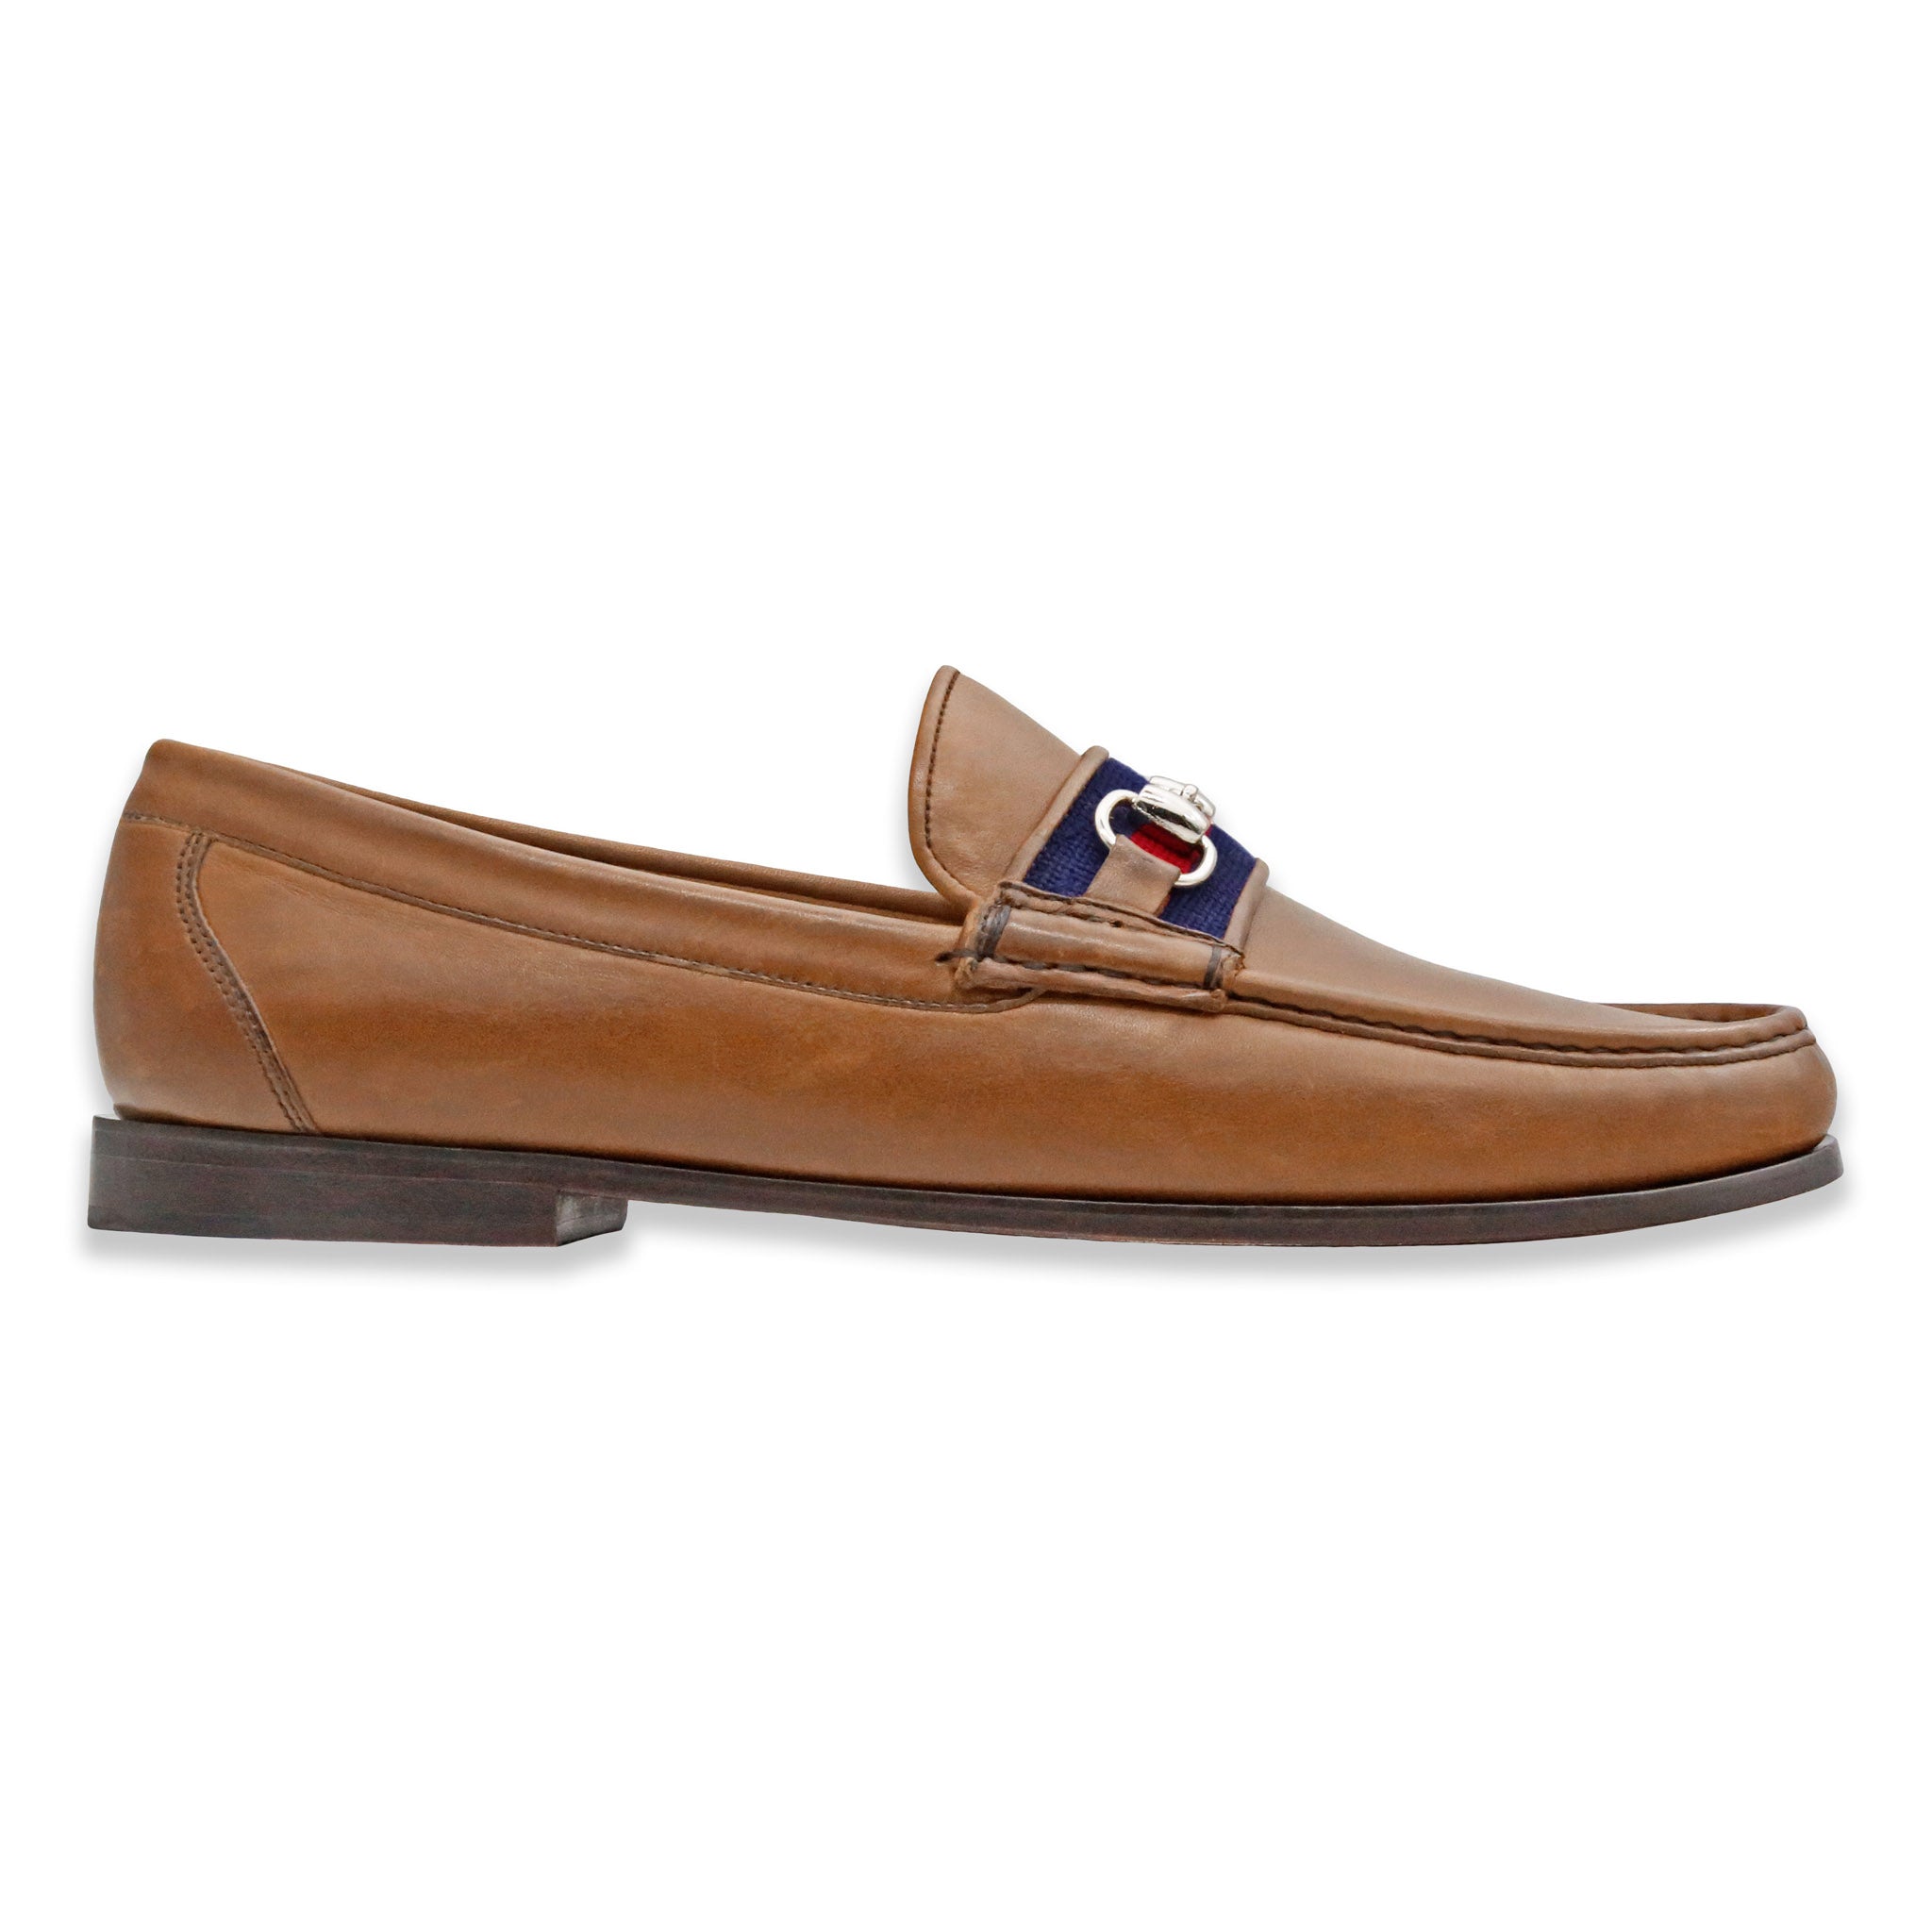 Surcingle Downing Bit Loafers (Dark Navy-Red) (Saddle Leather)